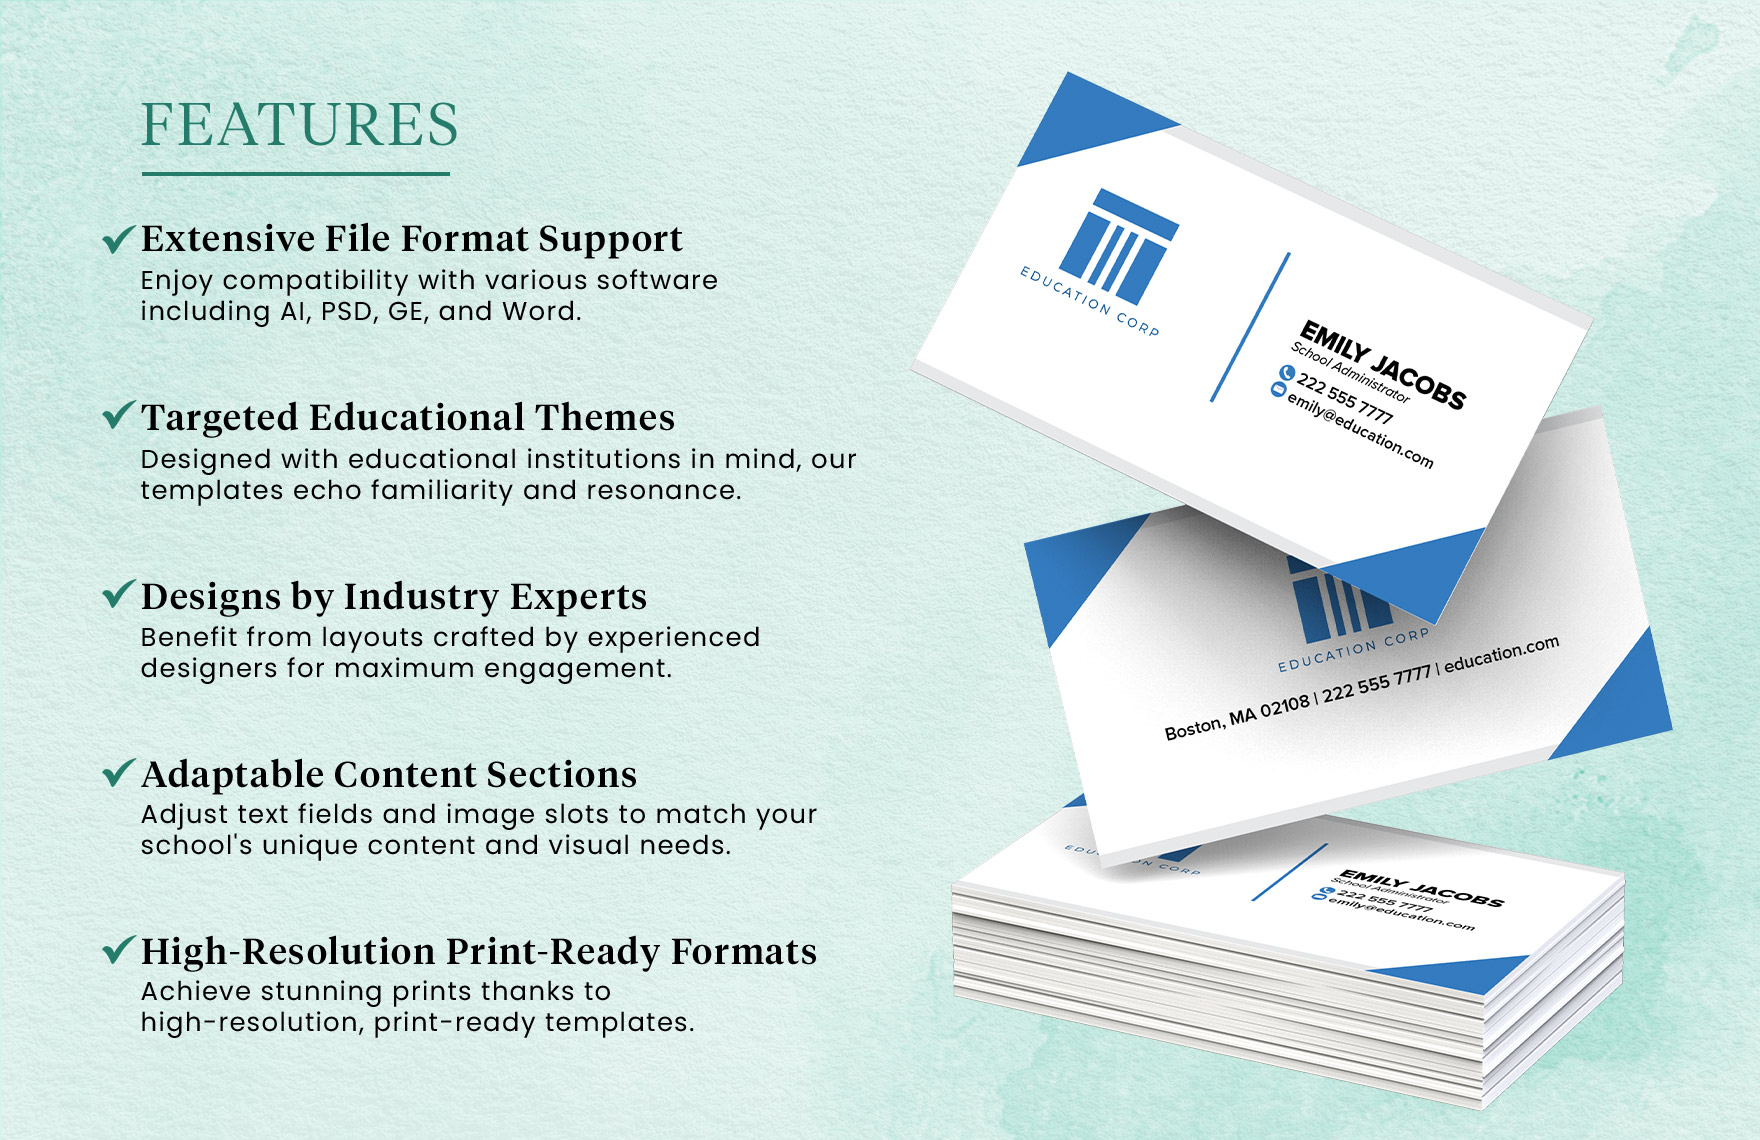 School Administrator Business Card Template